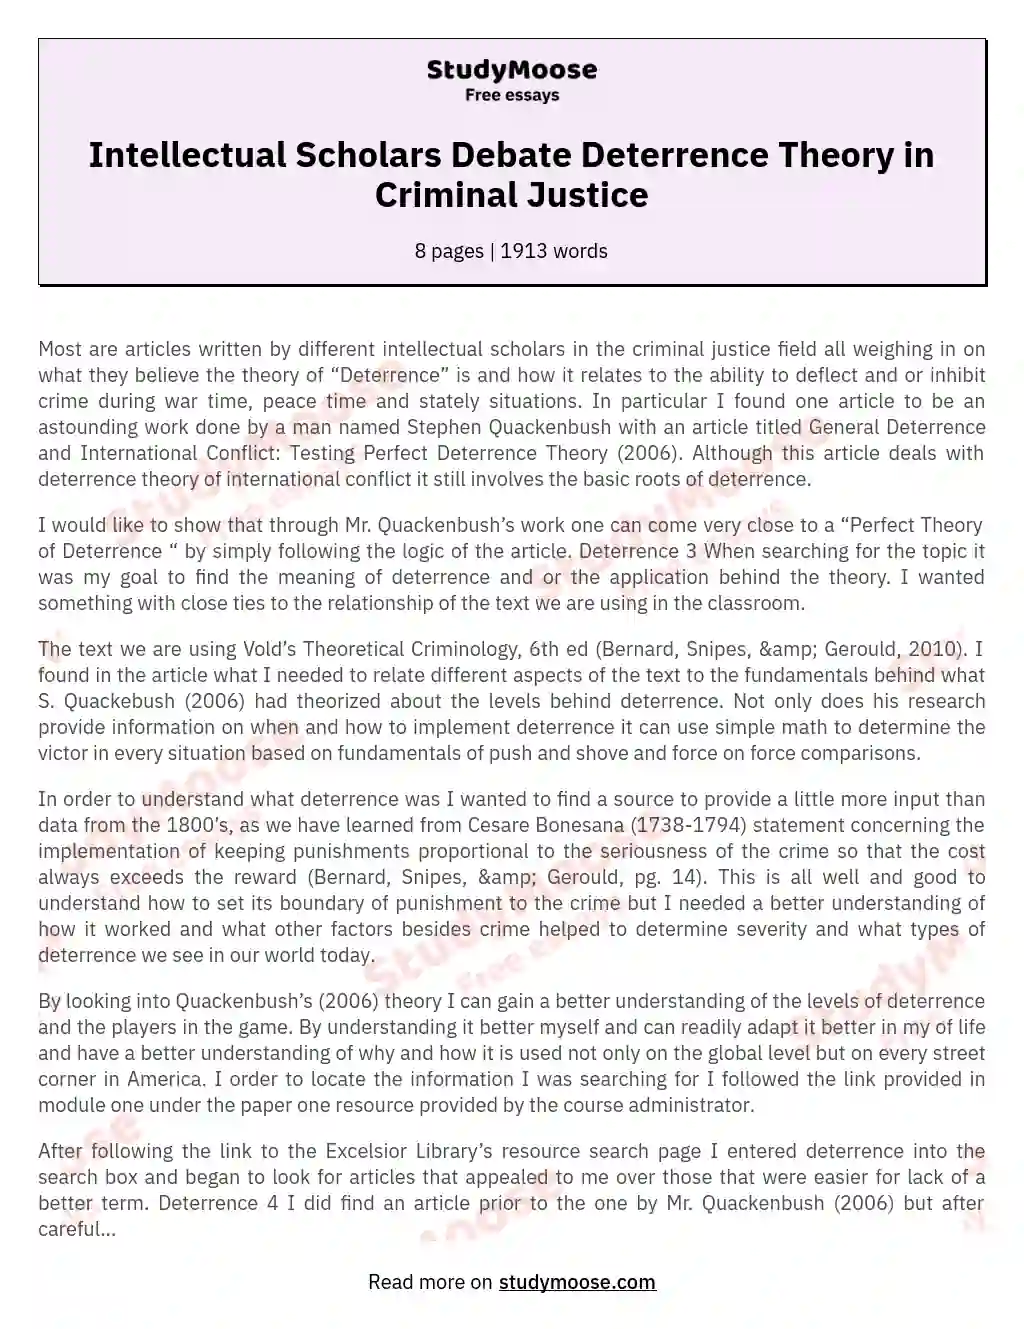 Intellectual Scholars Debate Deterrence Theory in Criminal Justice essay